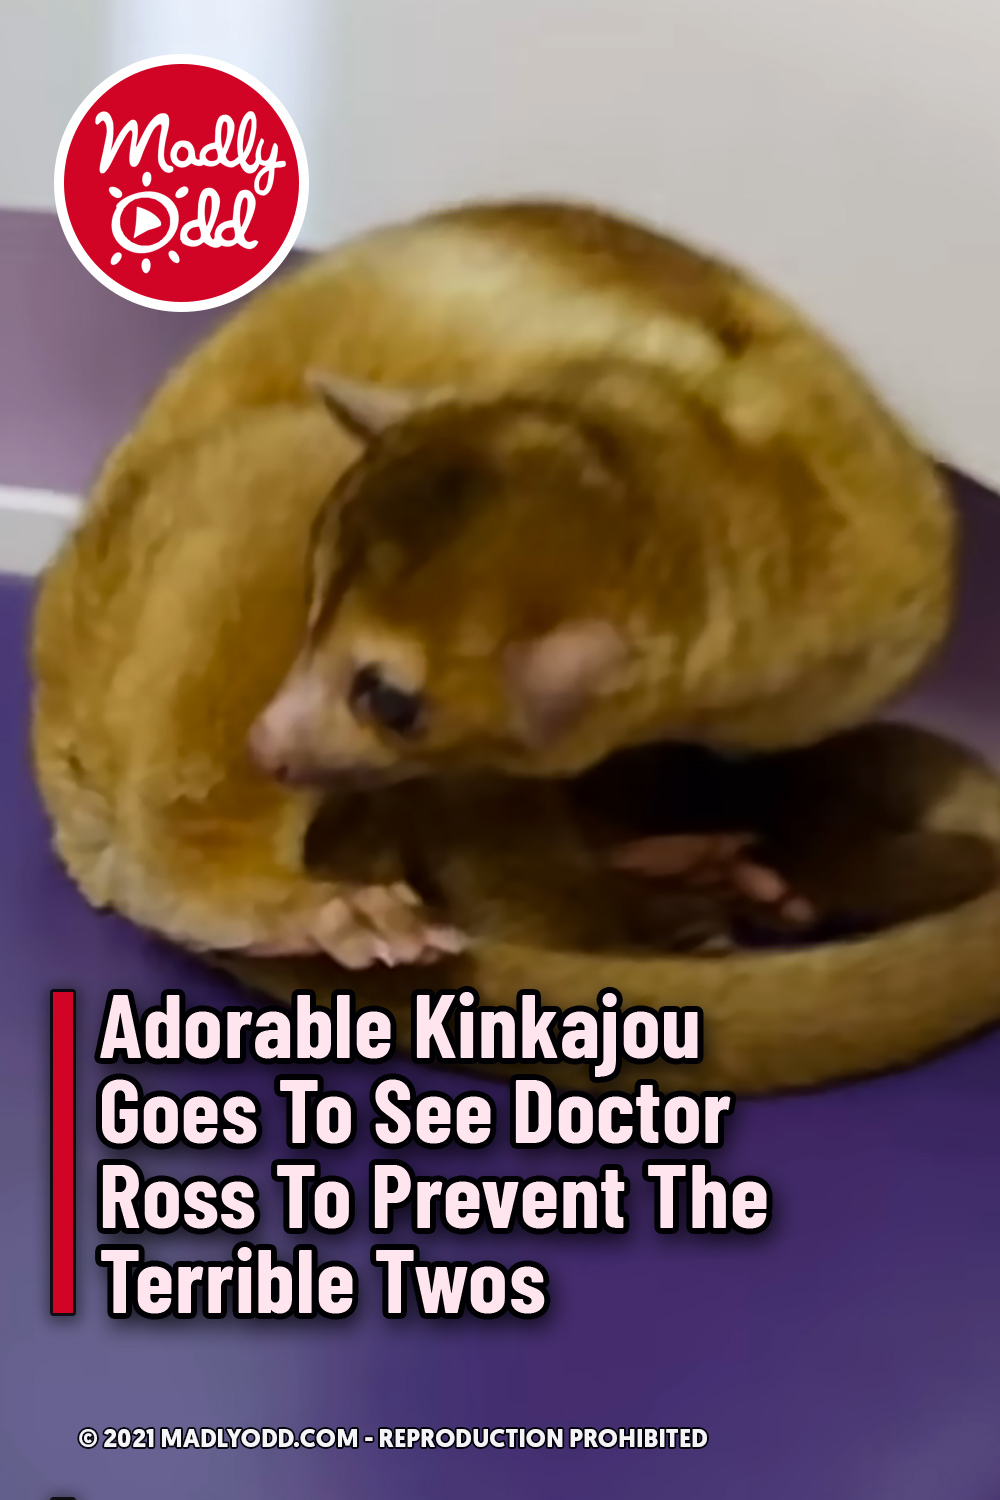 Adorable Kinkajou Goes To See Doctor Ross To Prevent The Terrible Twos